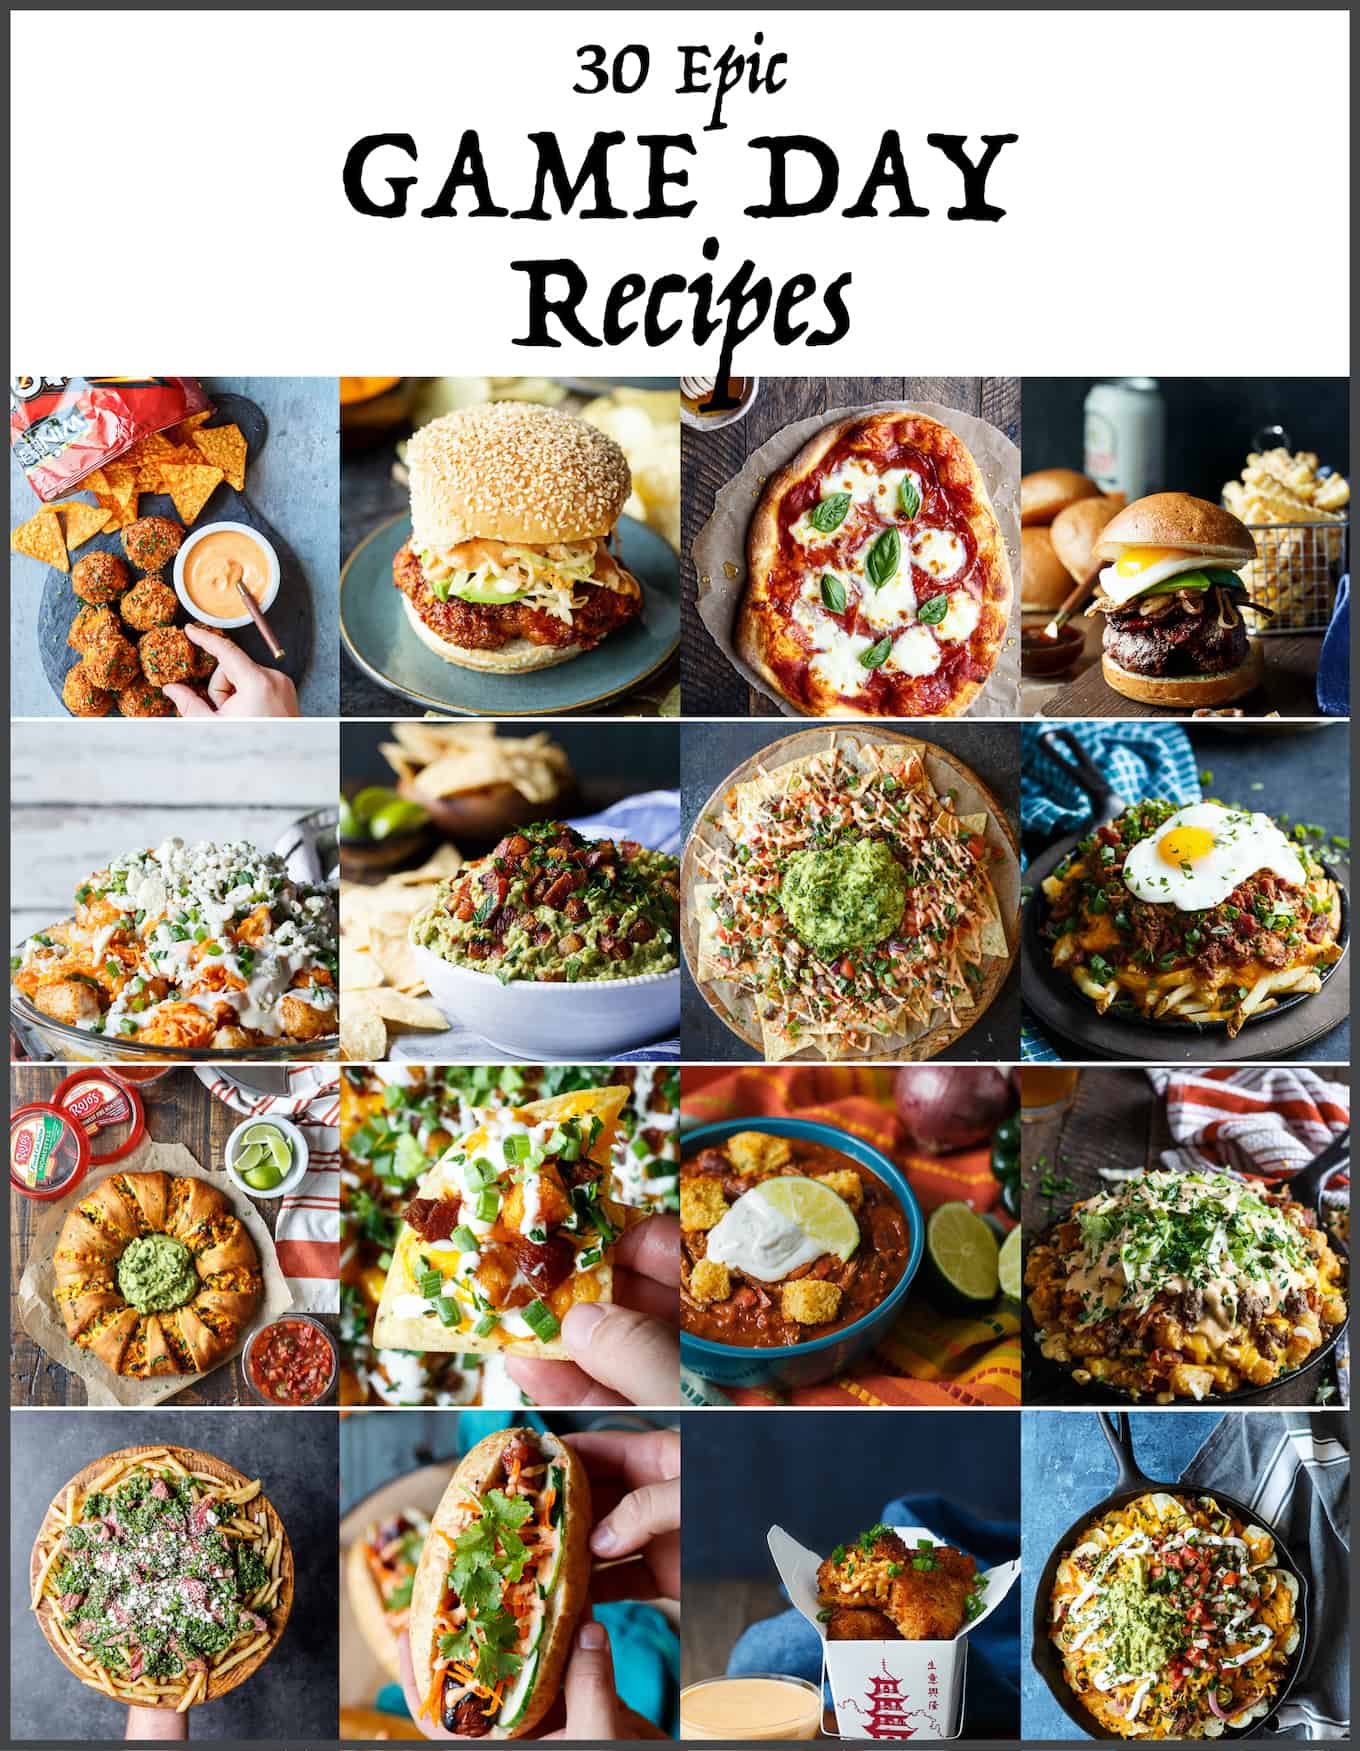 Epic Game Day Recipes